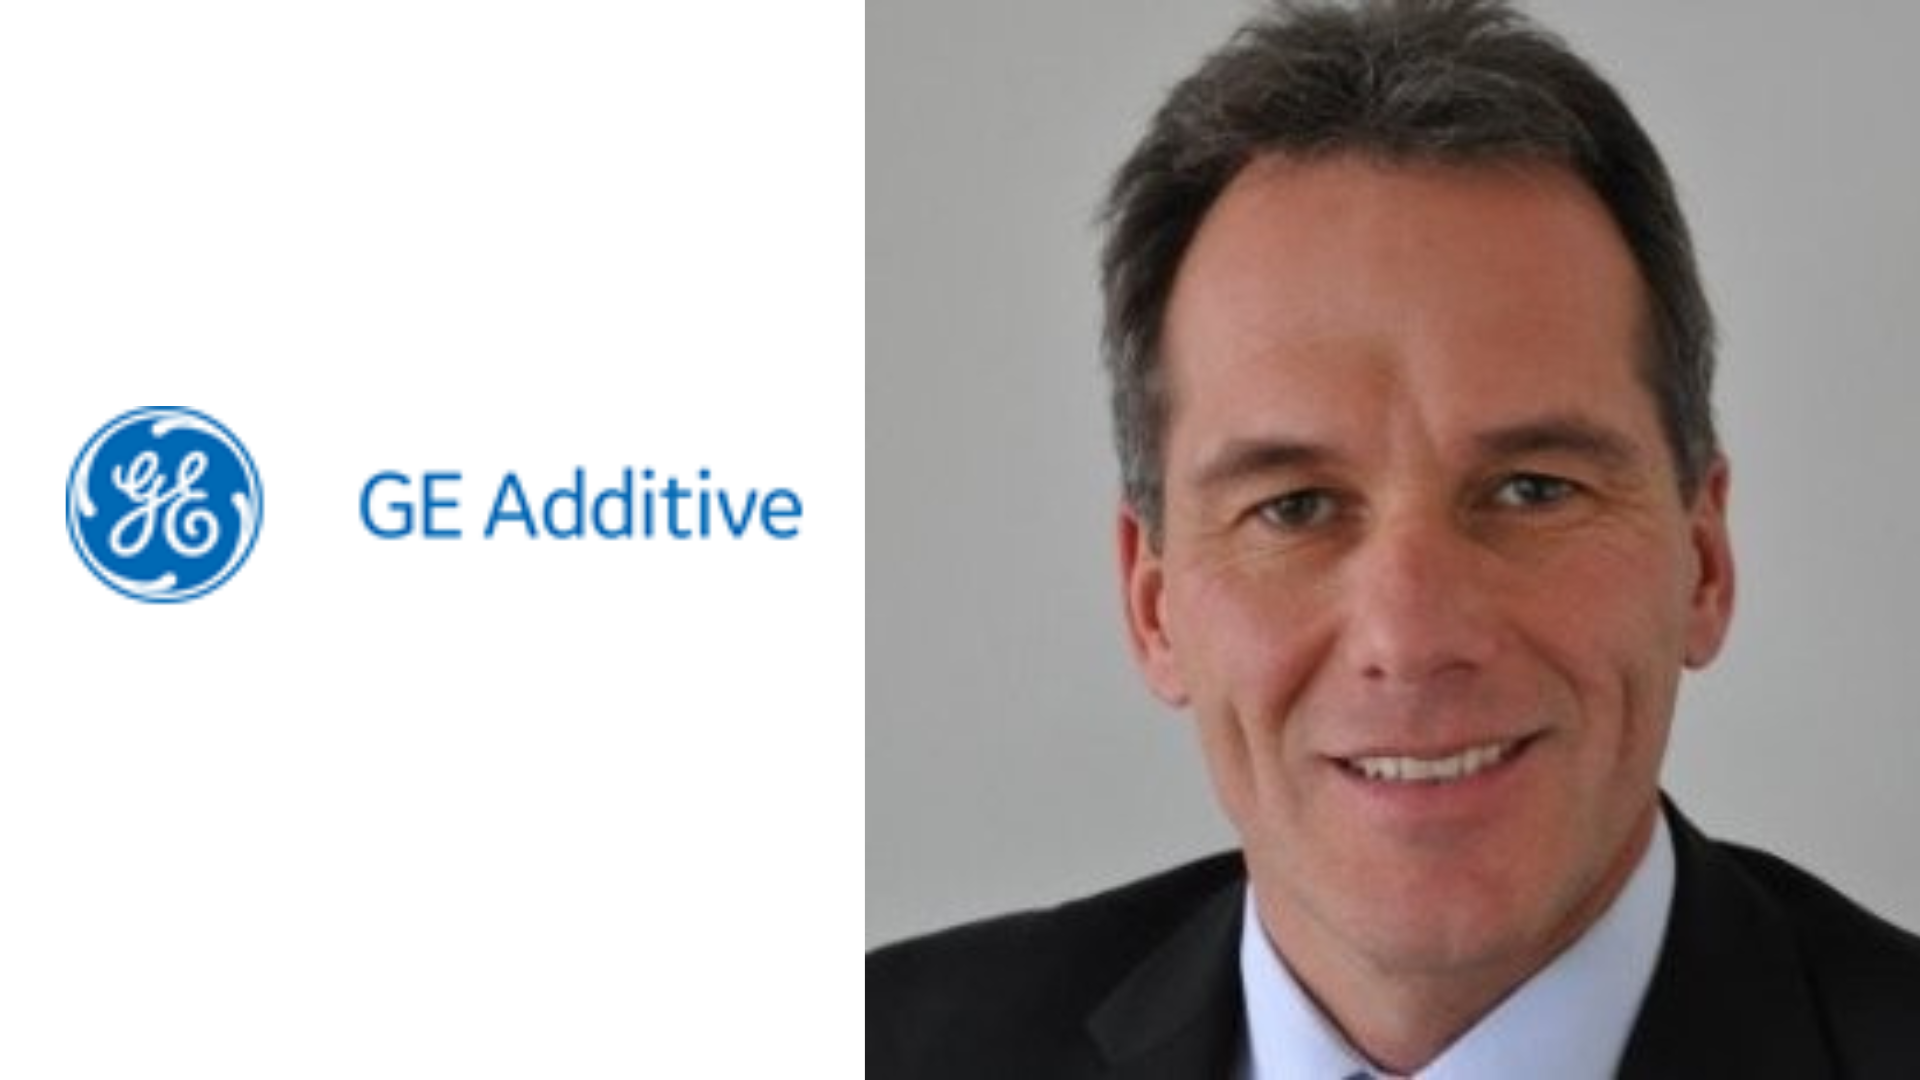 GE announced that Alexander Schmitz has been appointed as CEO of GE Additive, effective January 16, 2023, report into Riccardo Procacci.